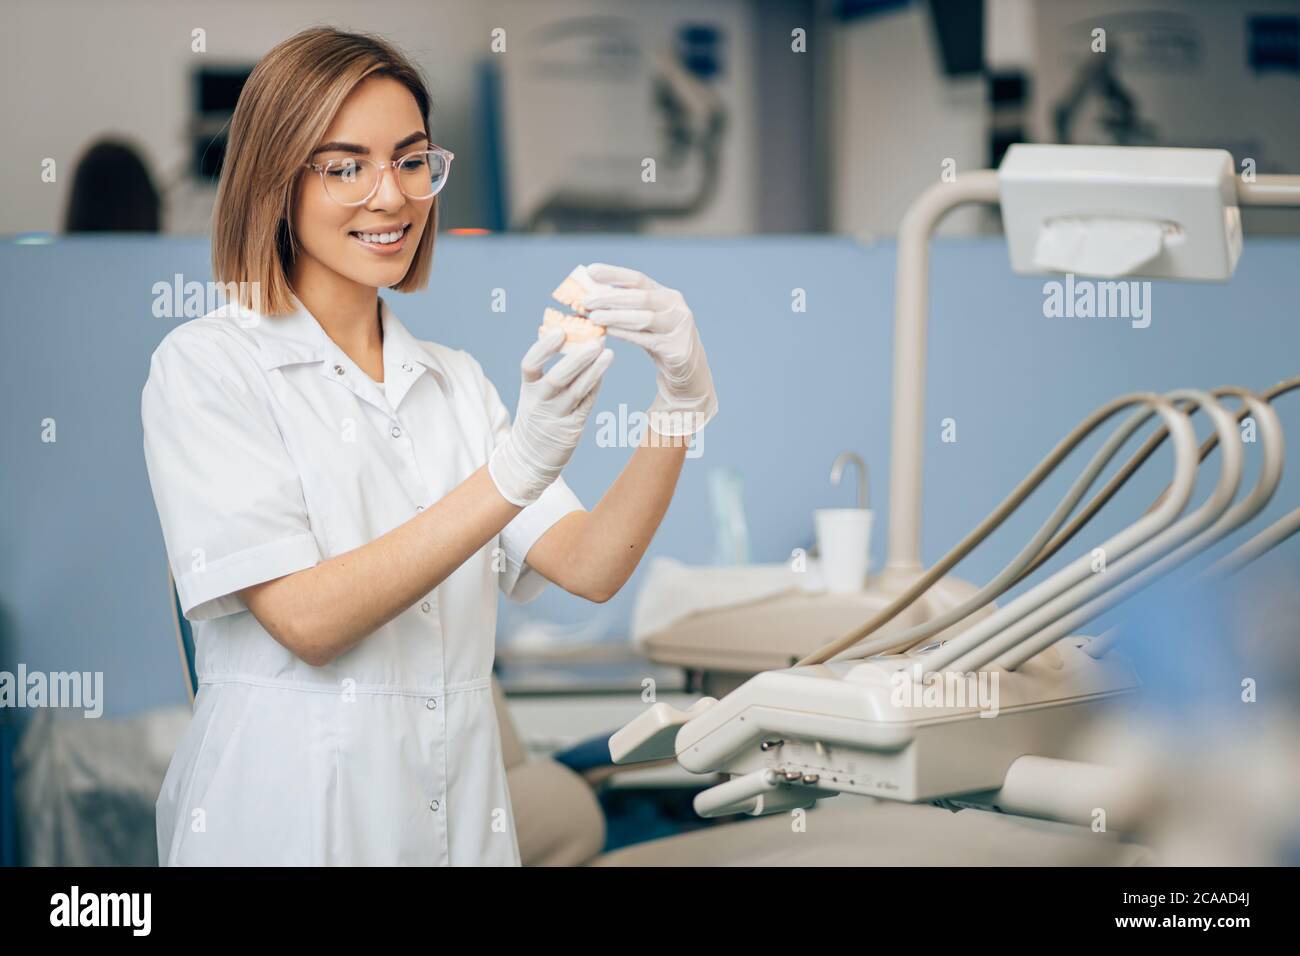 portrait of dental specialist at work, wearing white doctor's uniform, using medical instruments and equipment. Healthcare concept Stock Photo